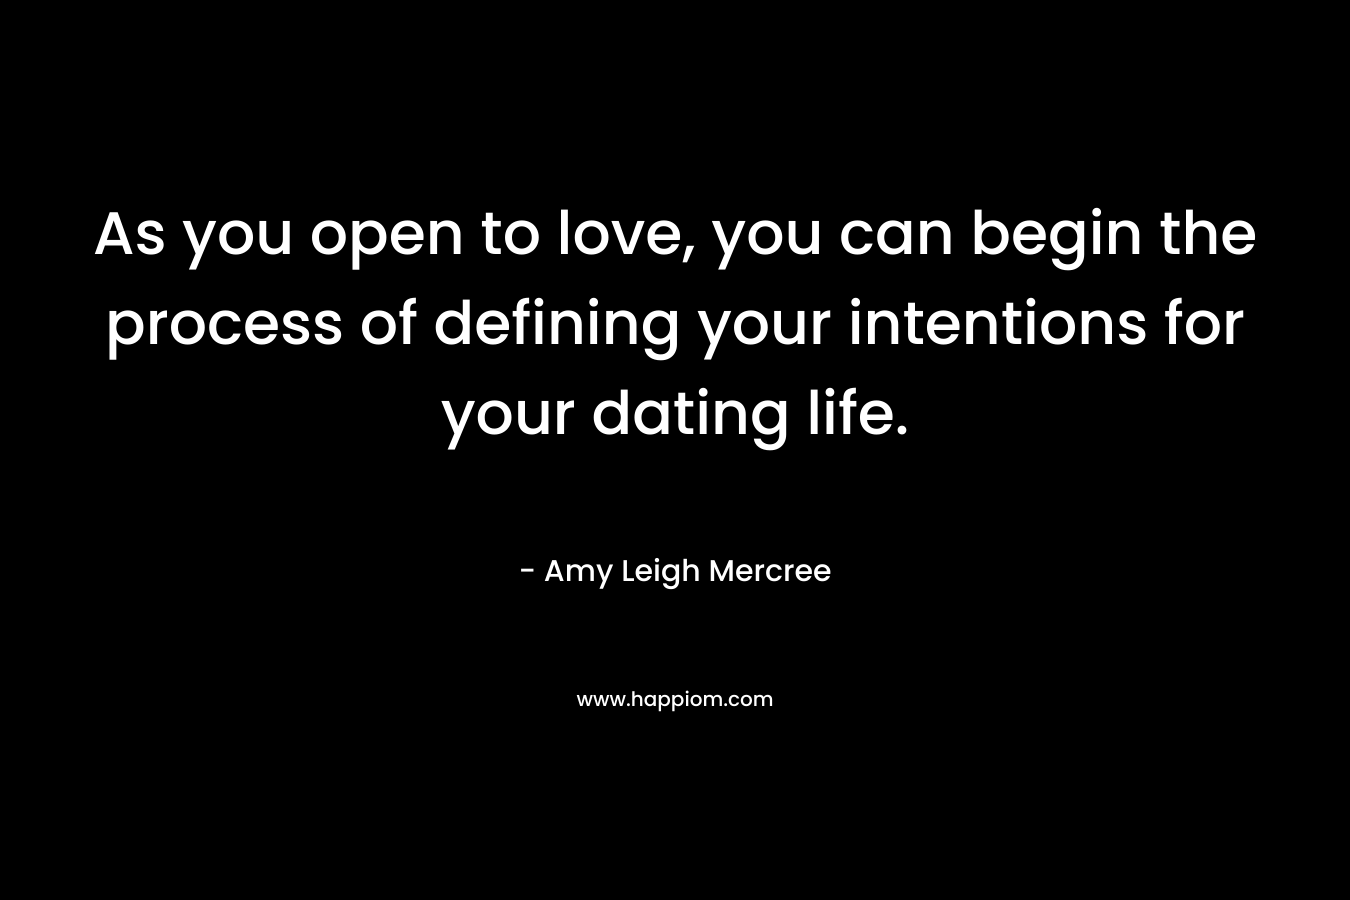 As you open to love, you can begin the process of defining your intentions for your dating life.